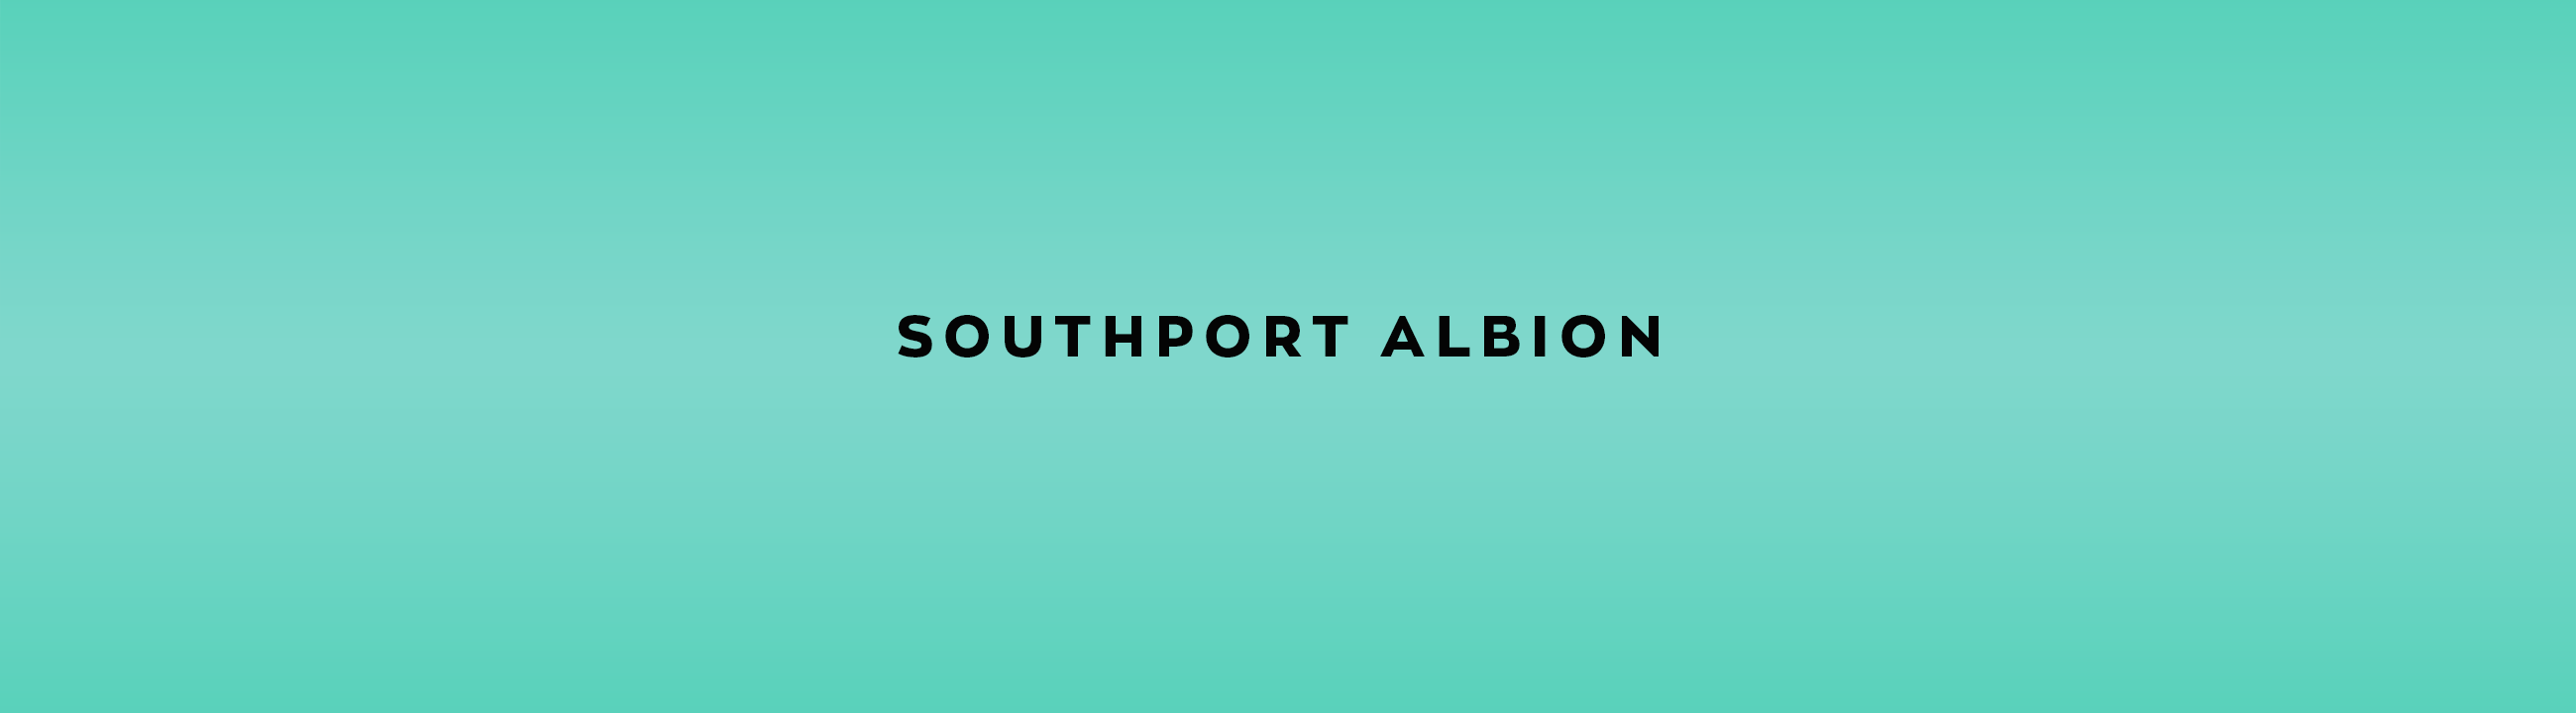 SOUTHPORT ALBION